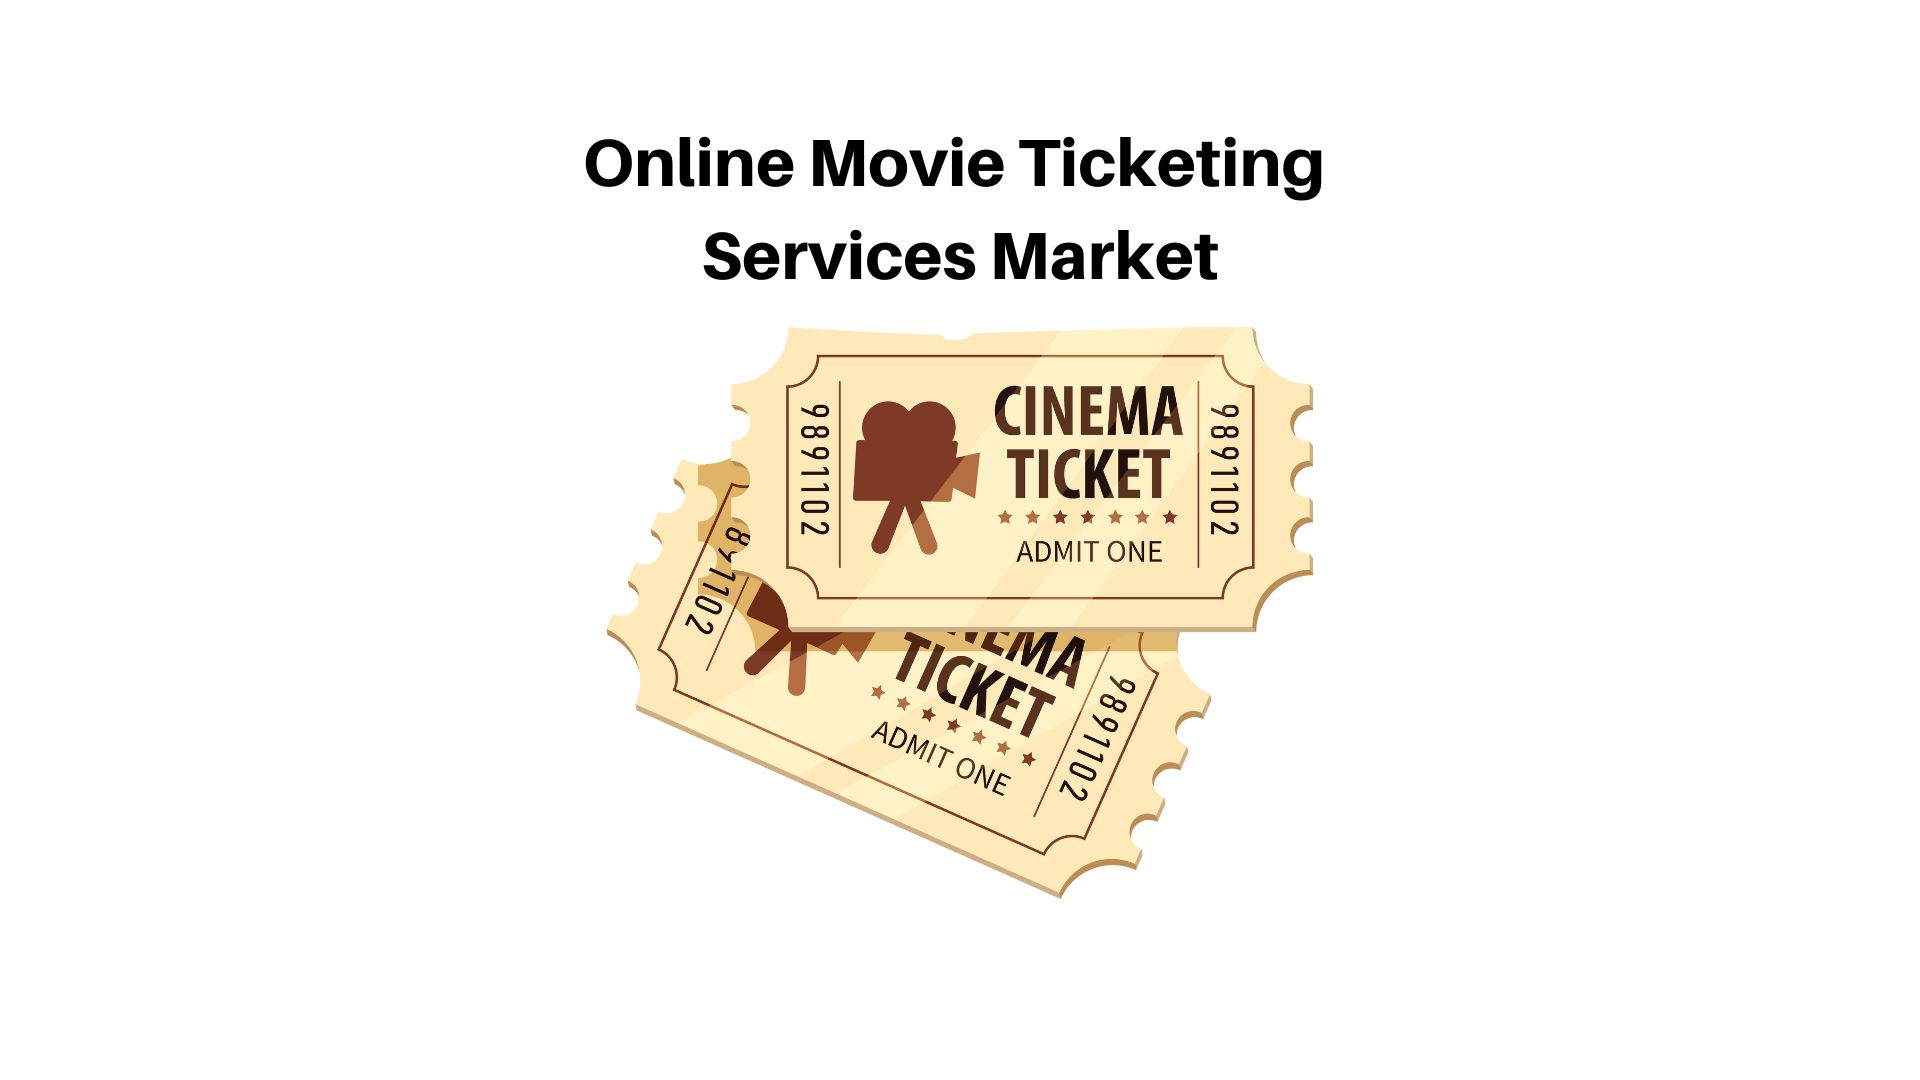 Online Movie Ticketing Services Market Projected to Hit USD 53.64 billion at a 7.8% CAGR by 2033